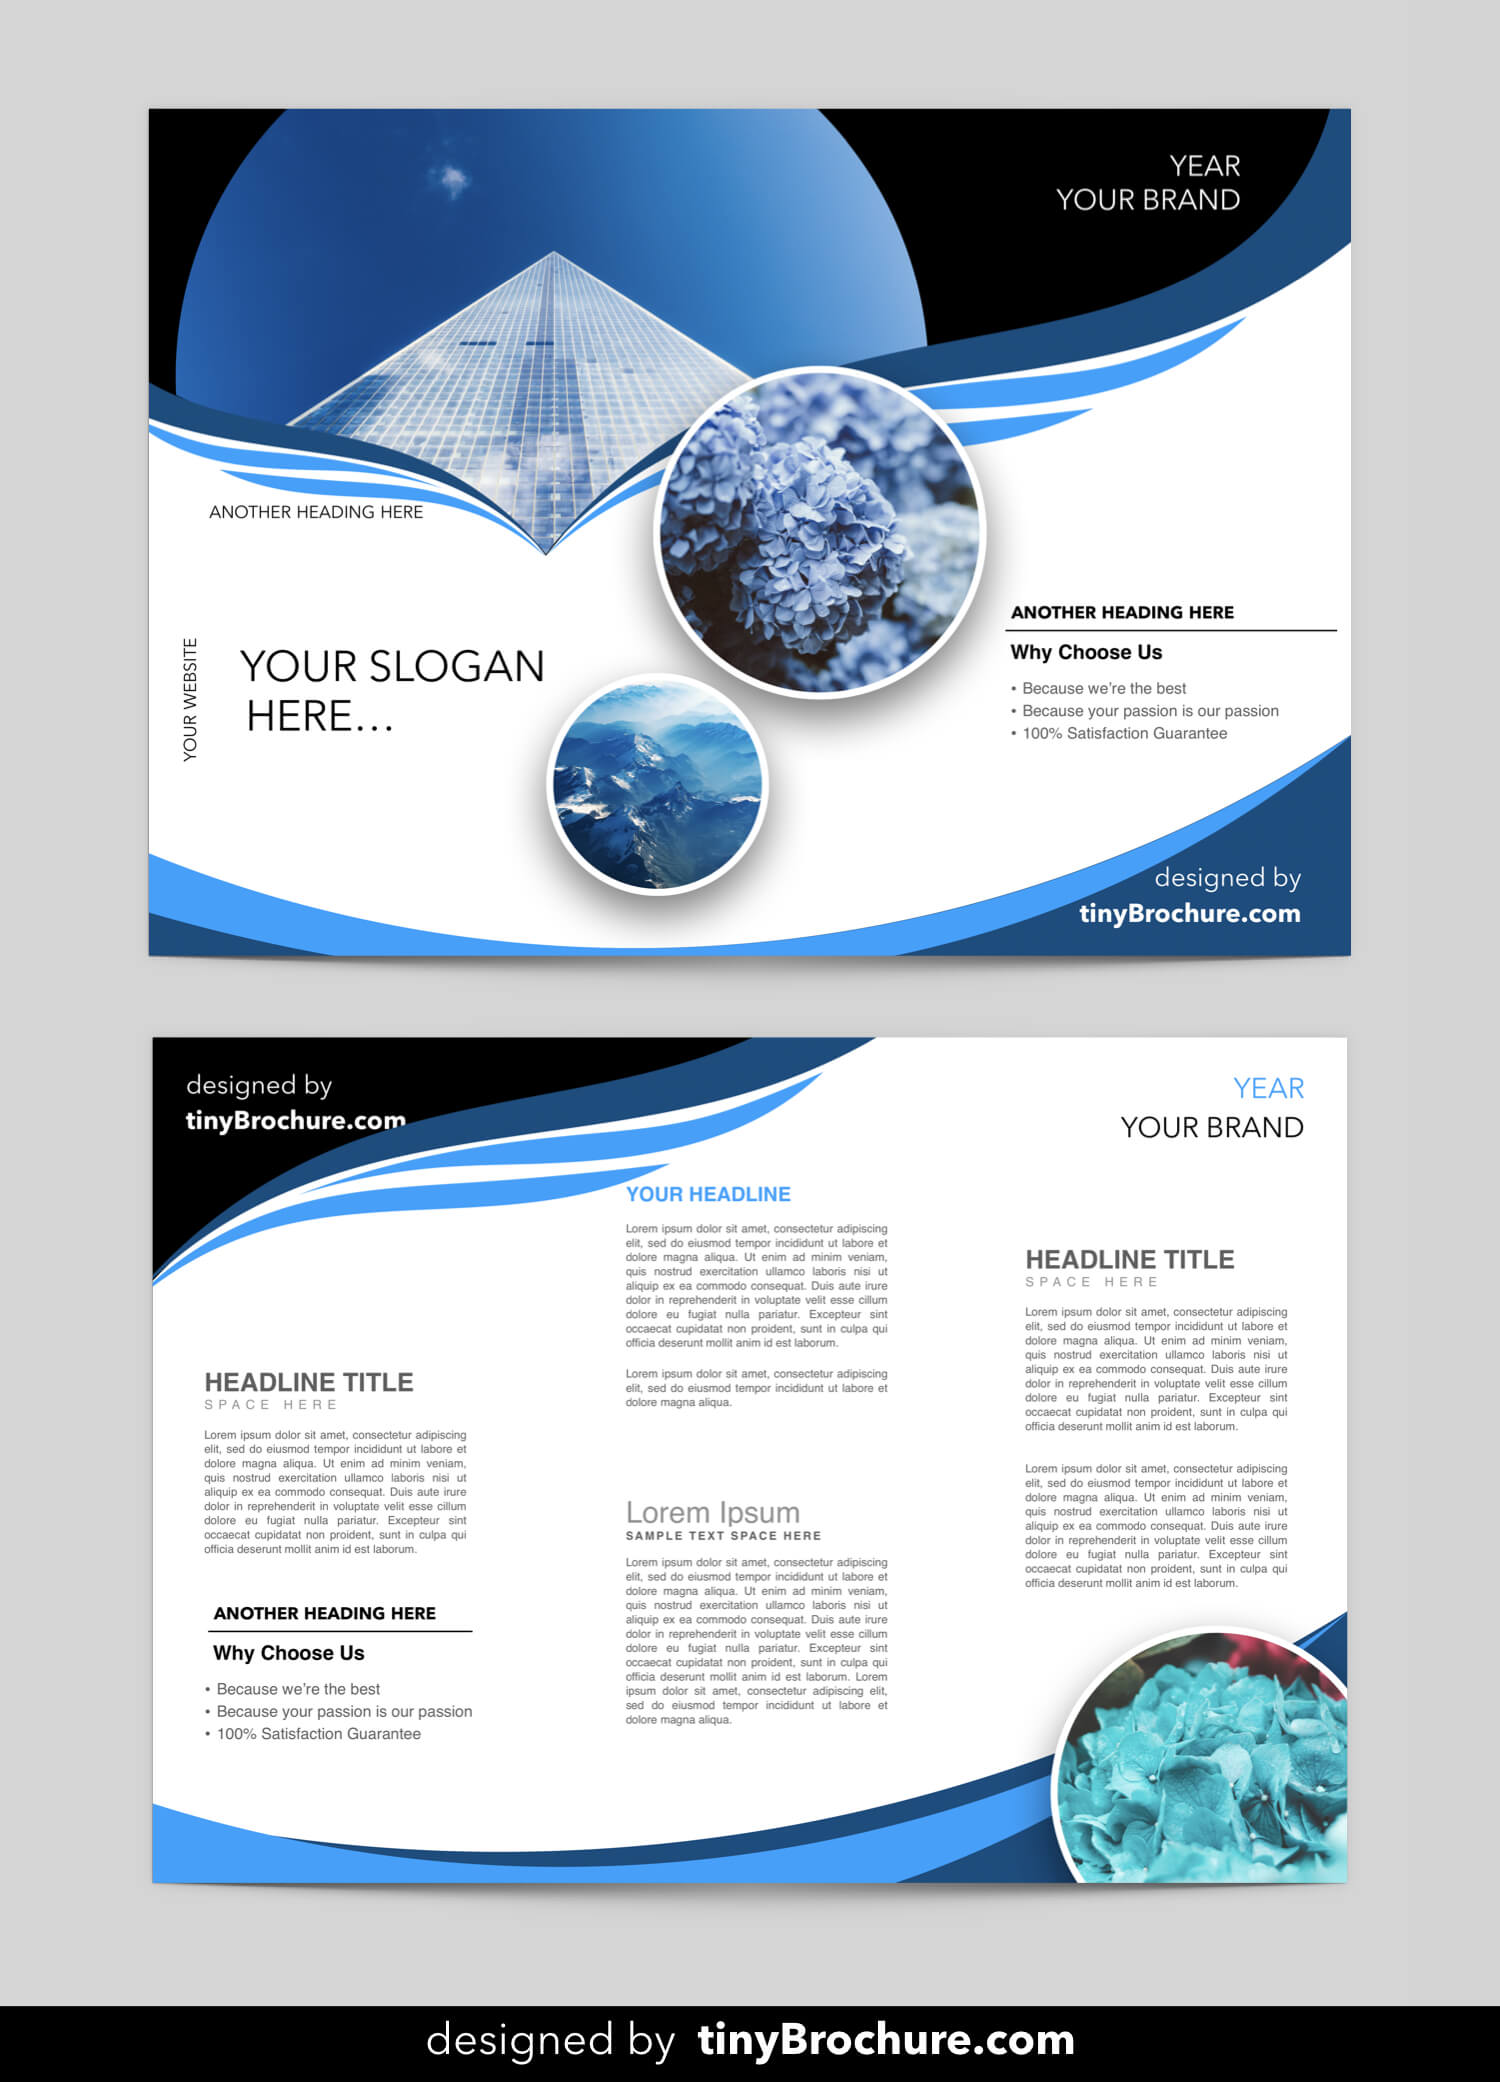 Editable Brochure Template Word Free Download | Word Pertaining To Adobe Illustrator Brochure Templates Free Download